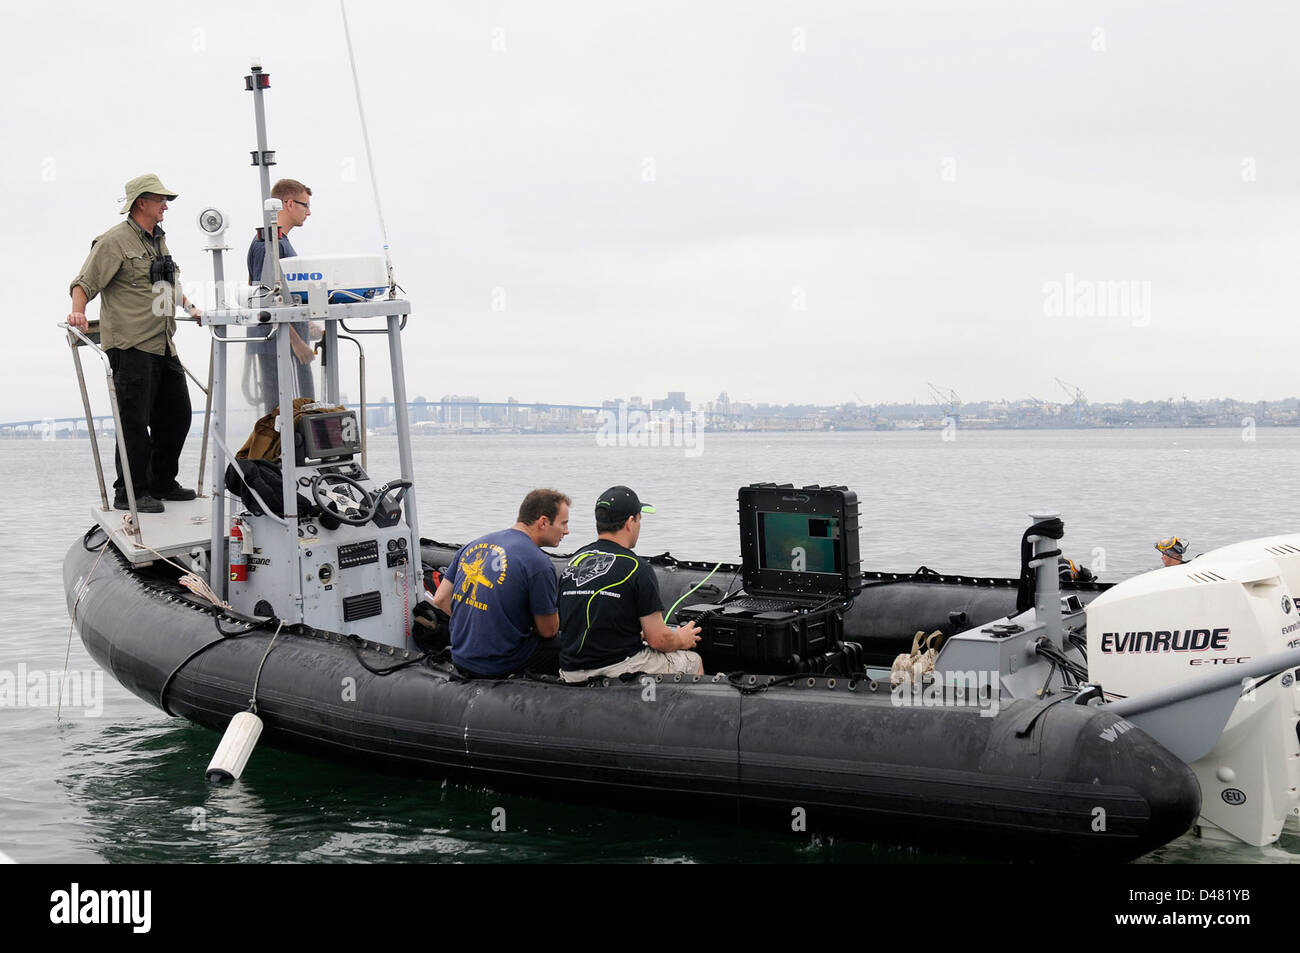 Sailors observe a monitor displaying. Stock Photo